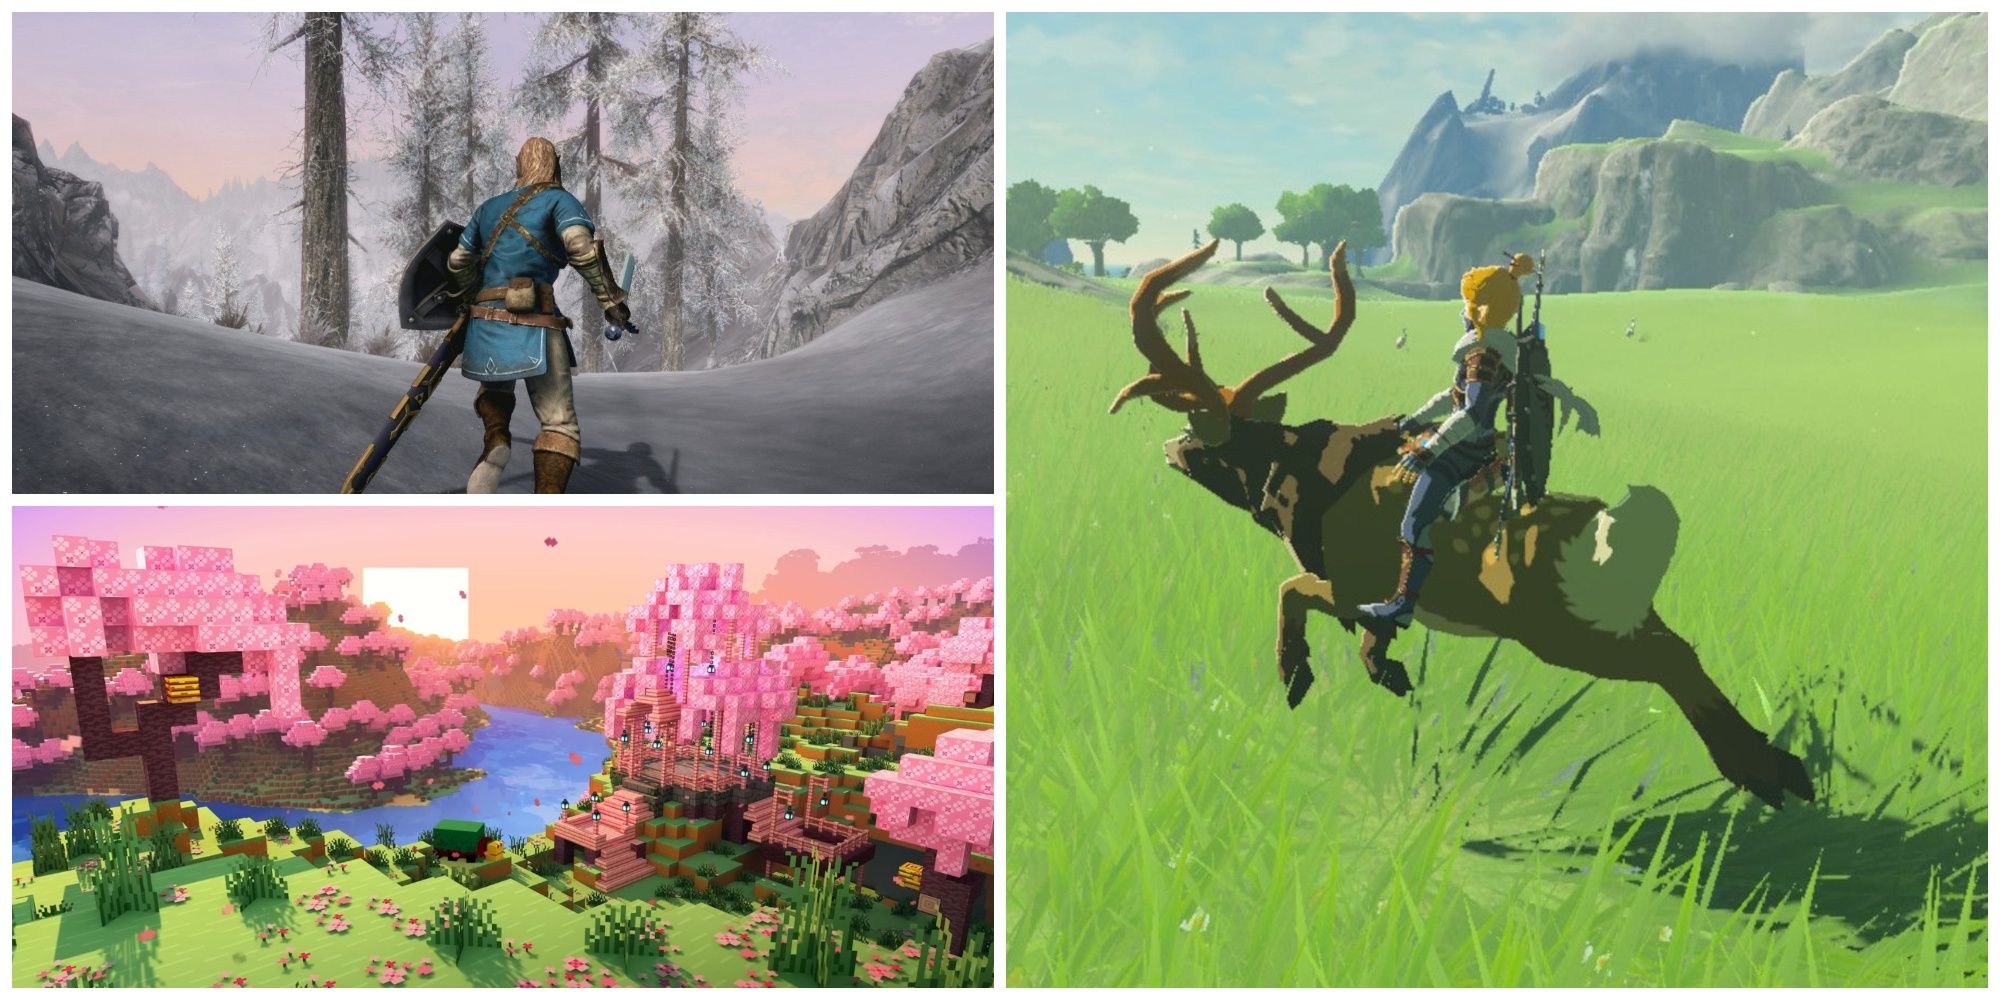 Top-left: Skyrim's Dragonborn in a snow-covered forest. Bottom-left: Cherry blossoms in Minecraft. Right: Link riding a deer in an open field in The Legend of Zelda: Breath of the Wild.